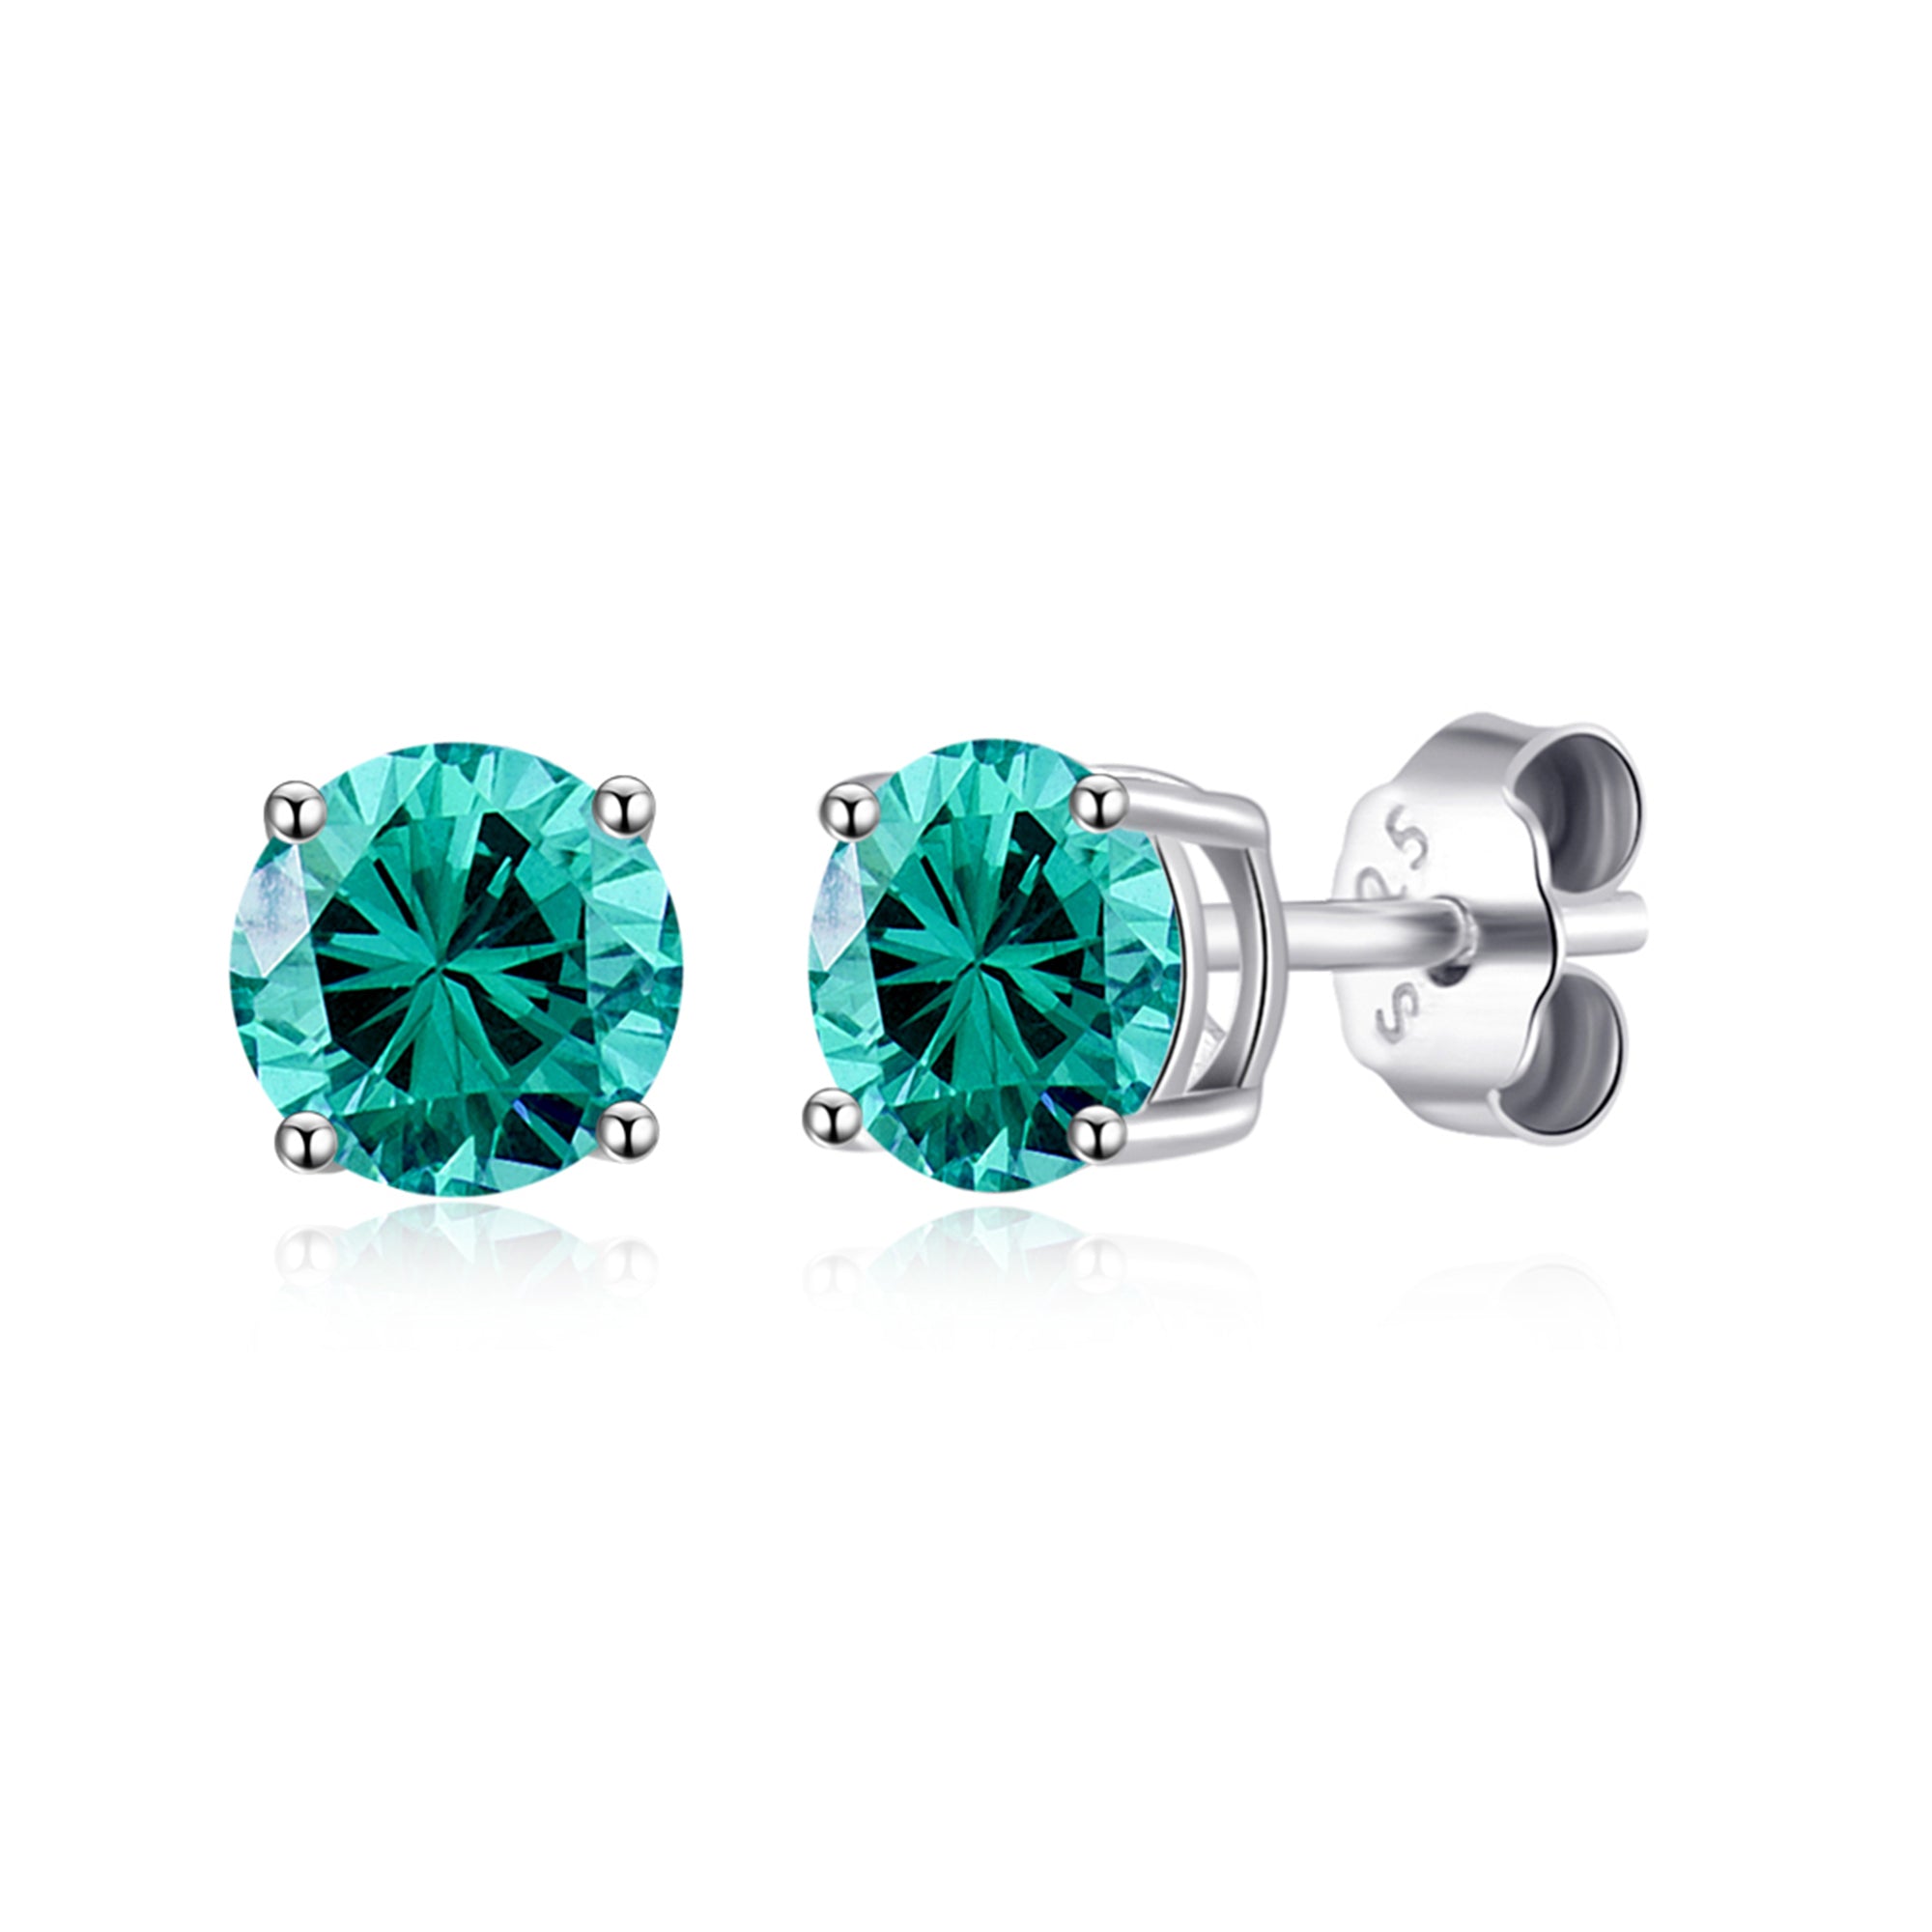 Sterling Silver December (Blue Topaz) Birthstone Earrings Created with Zircondia® Crystals by Philip Jones Jewellery